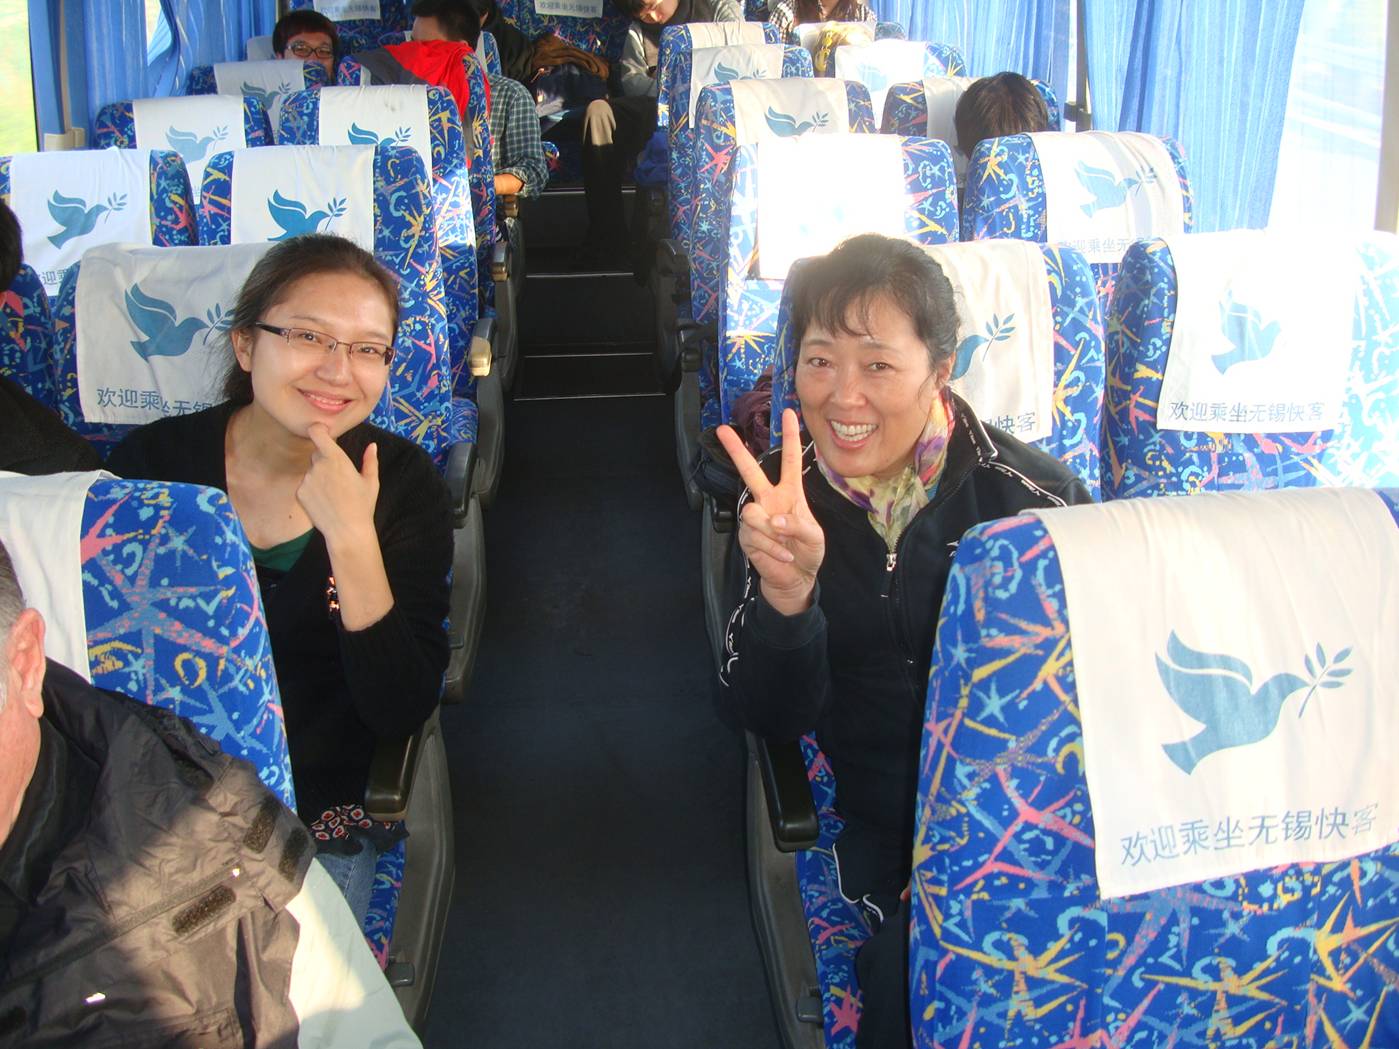 Picture:  Jesse and Ms. Liu on the bus to Daming Shan, Zhejiang Province, China